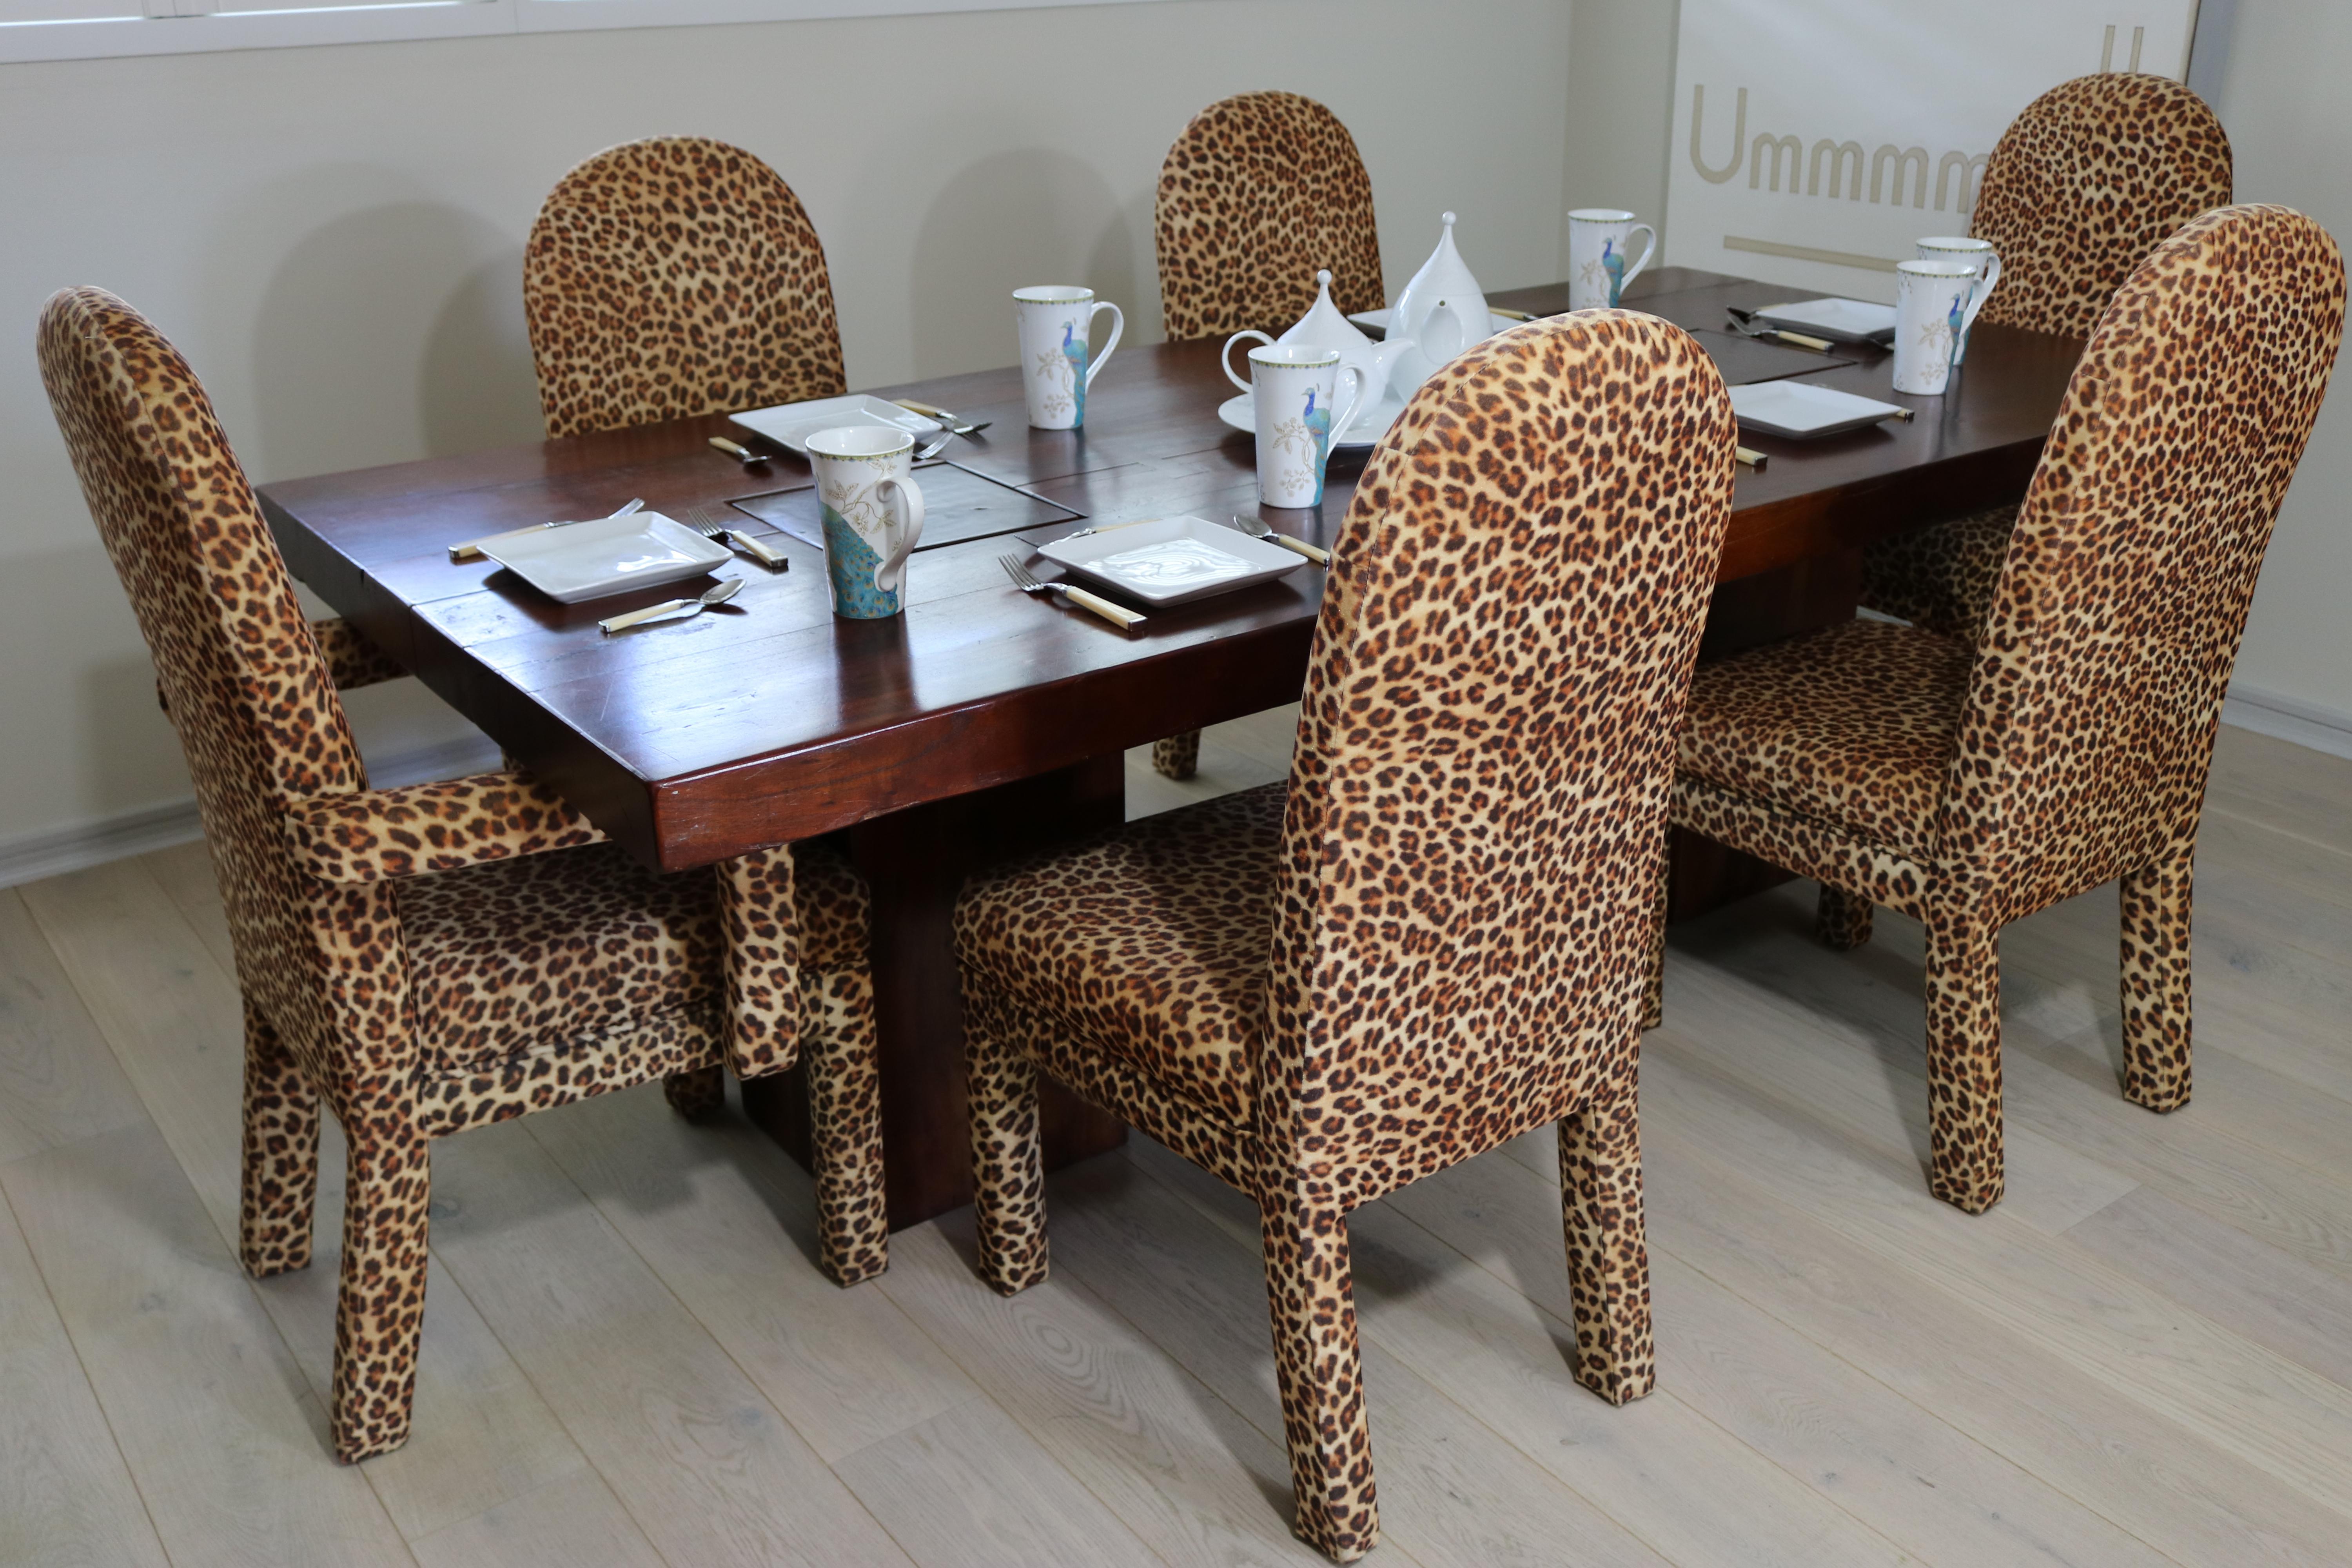 Mid-Century Modern set of 6 parsons style dining chairs
4 armless/ 2-arm. Fully upholstered in faux 
brushed cotton blend leopard pattern. 
The fabric is in amazingly good condition.

A thrifty buy for stylish dining!

